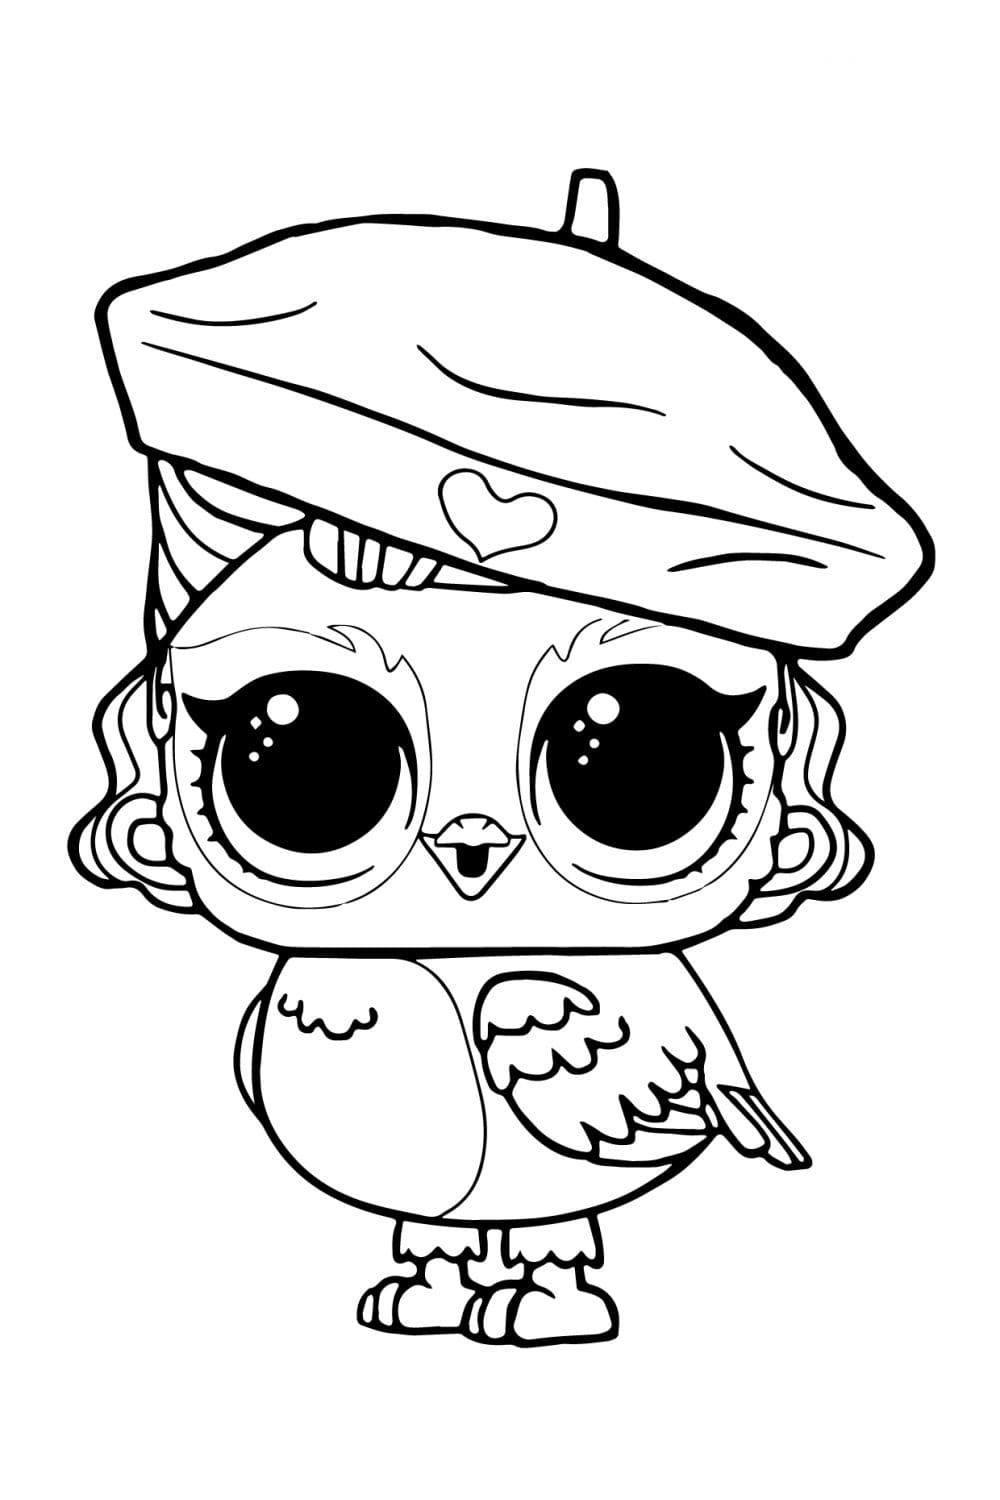 lol pet owl angel coloring page free printable coloring pages for kids